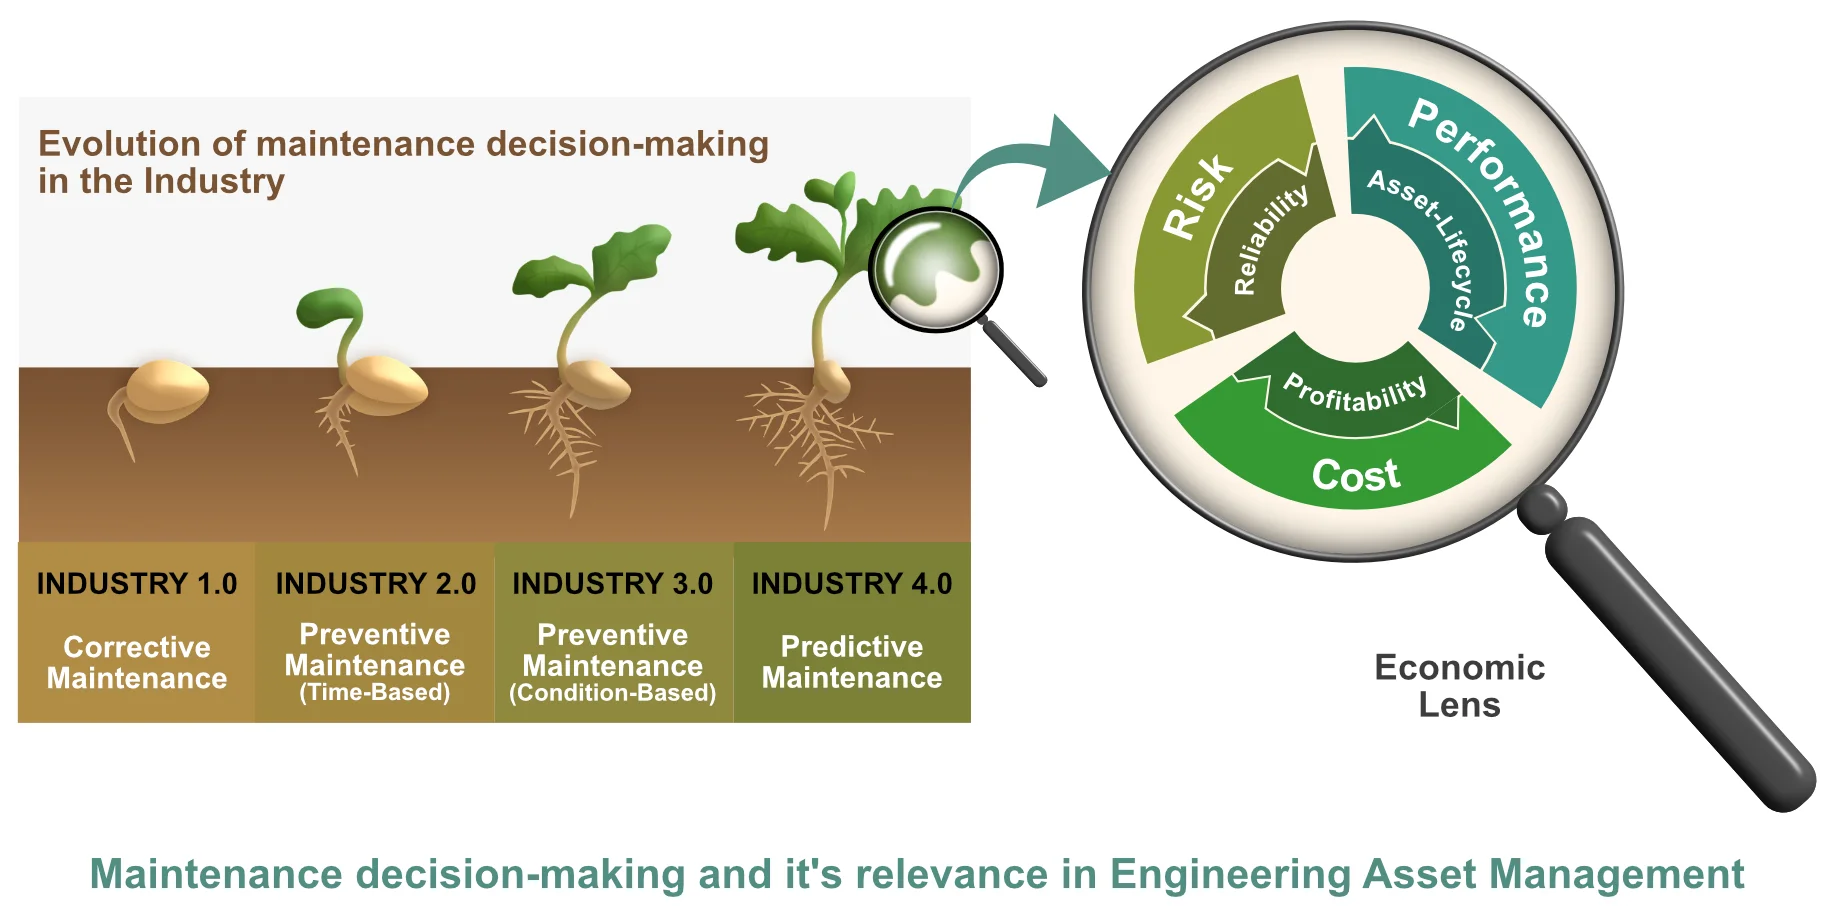 Maintenance decision-making and its relevance in engineering asset management